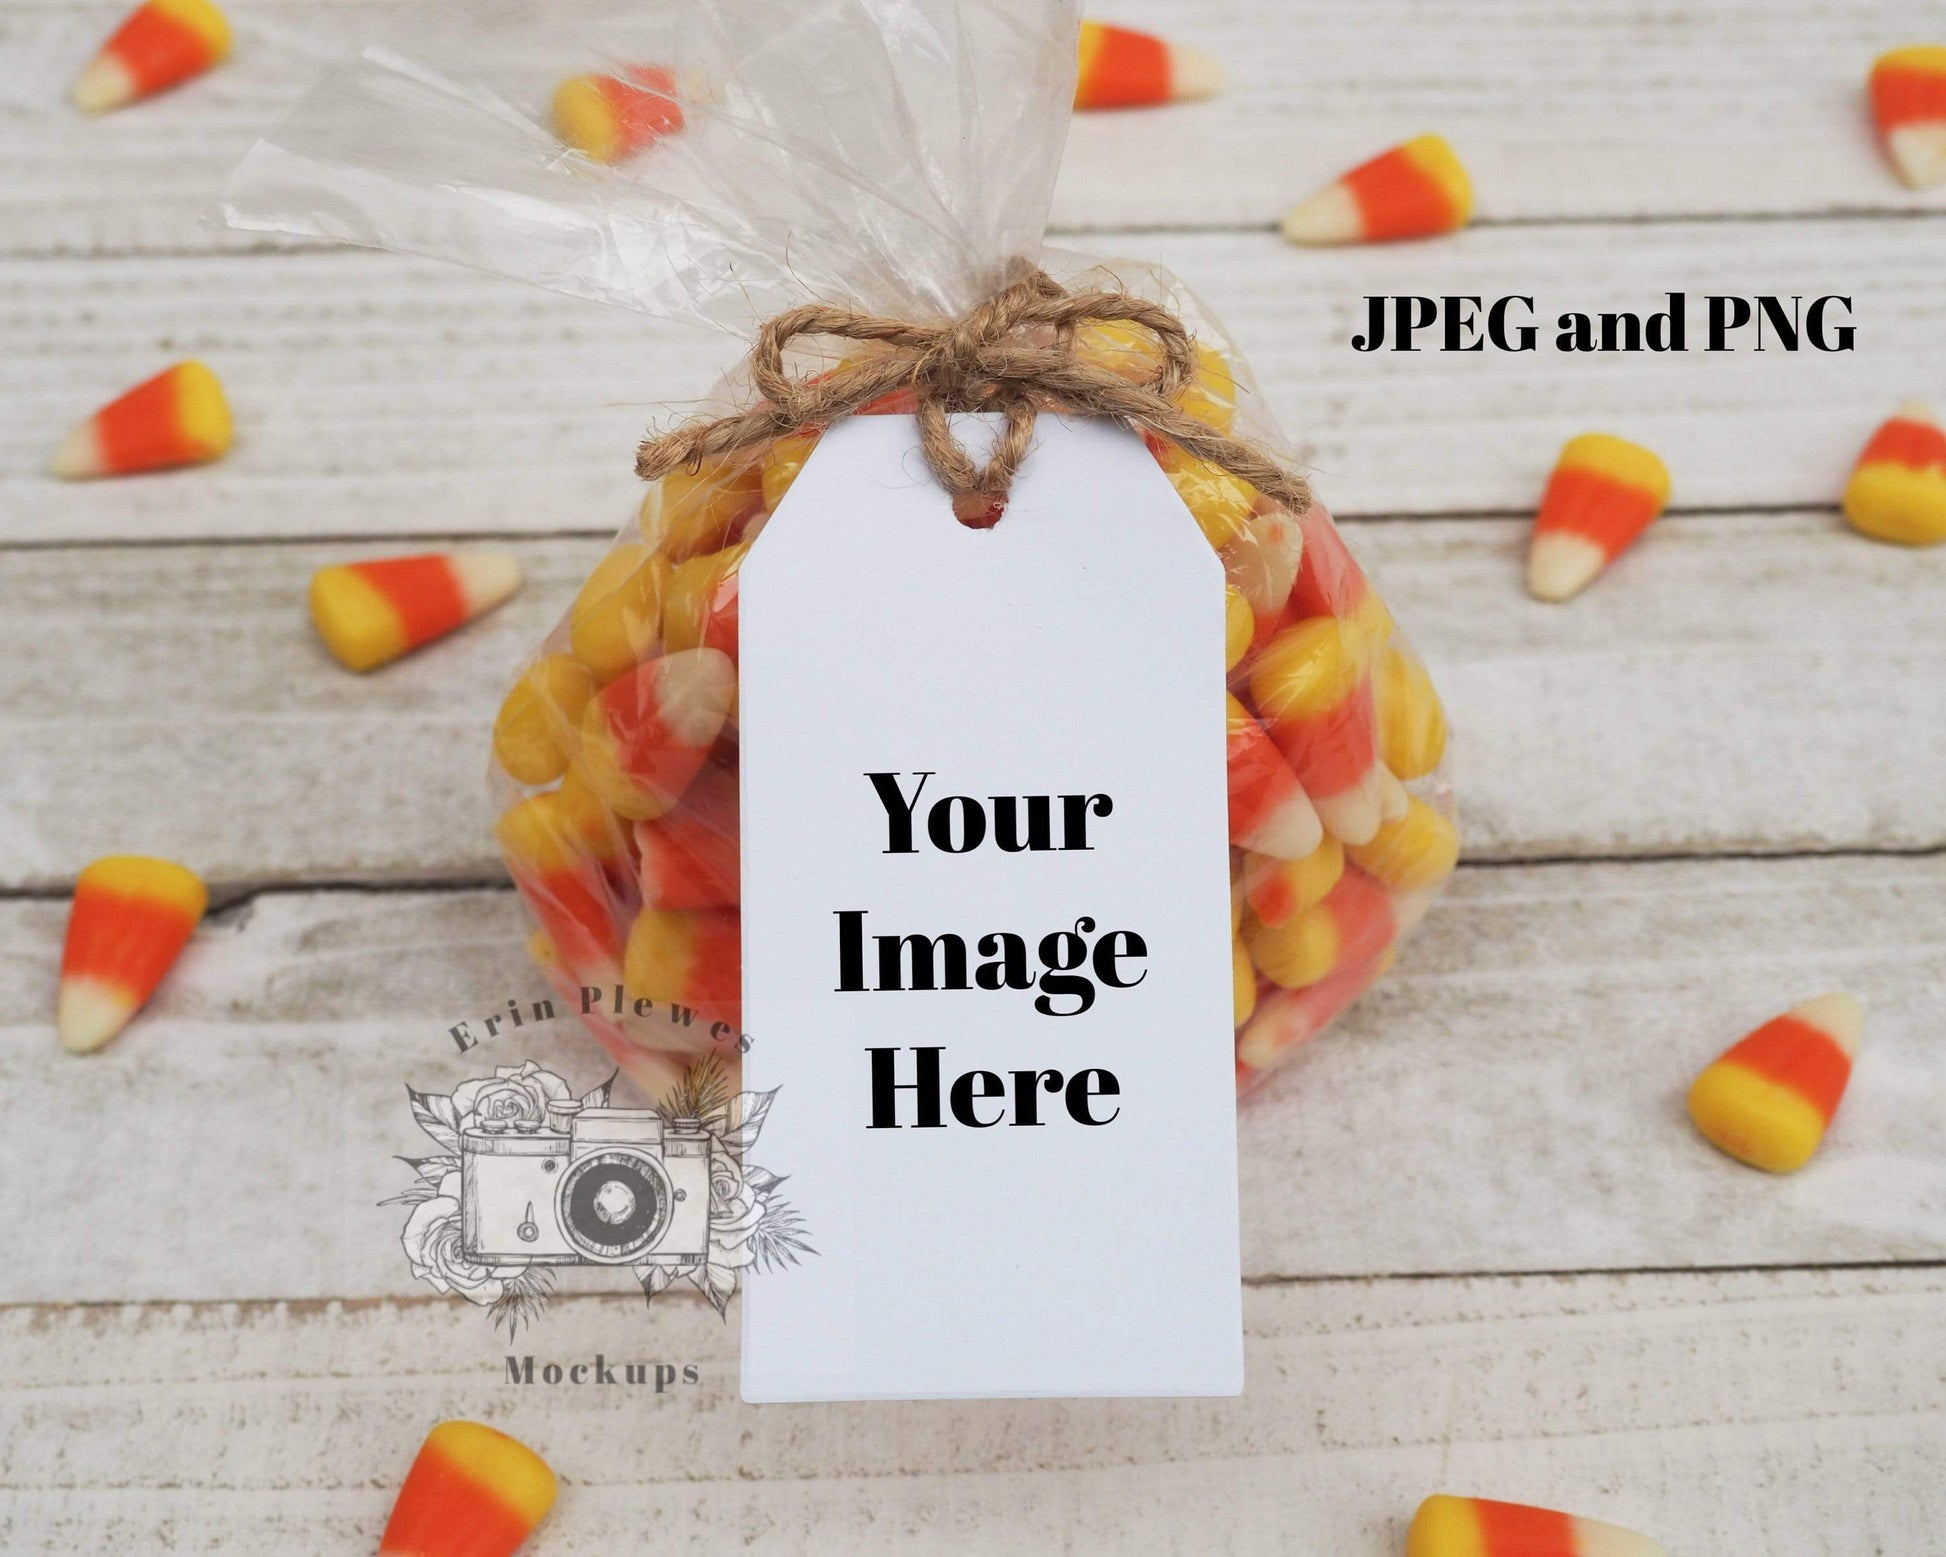 Erin Plewes Mockups Halloween gift tag mockup, Party favor mock-up for thank you gift lifestyle stock photo, JPG and PNG instant Digital Download